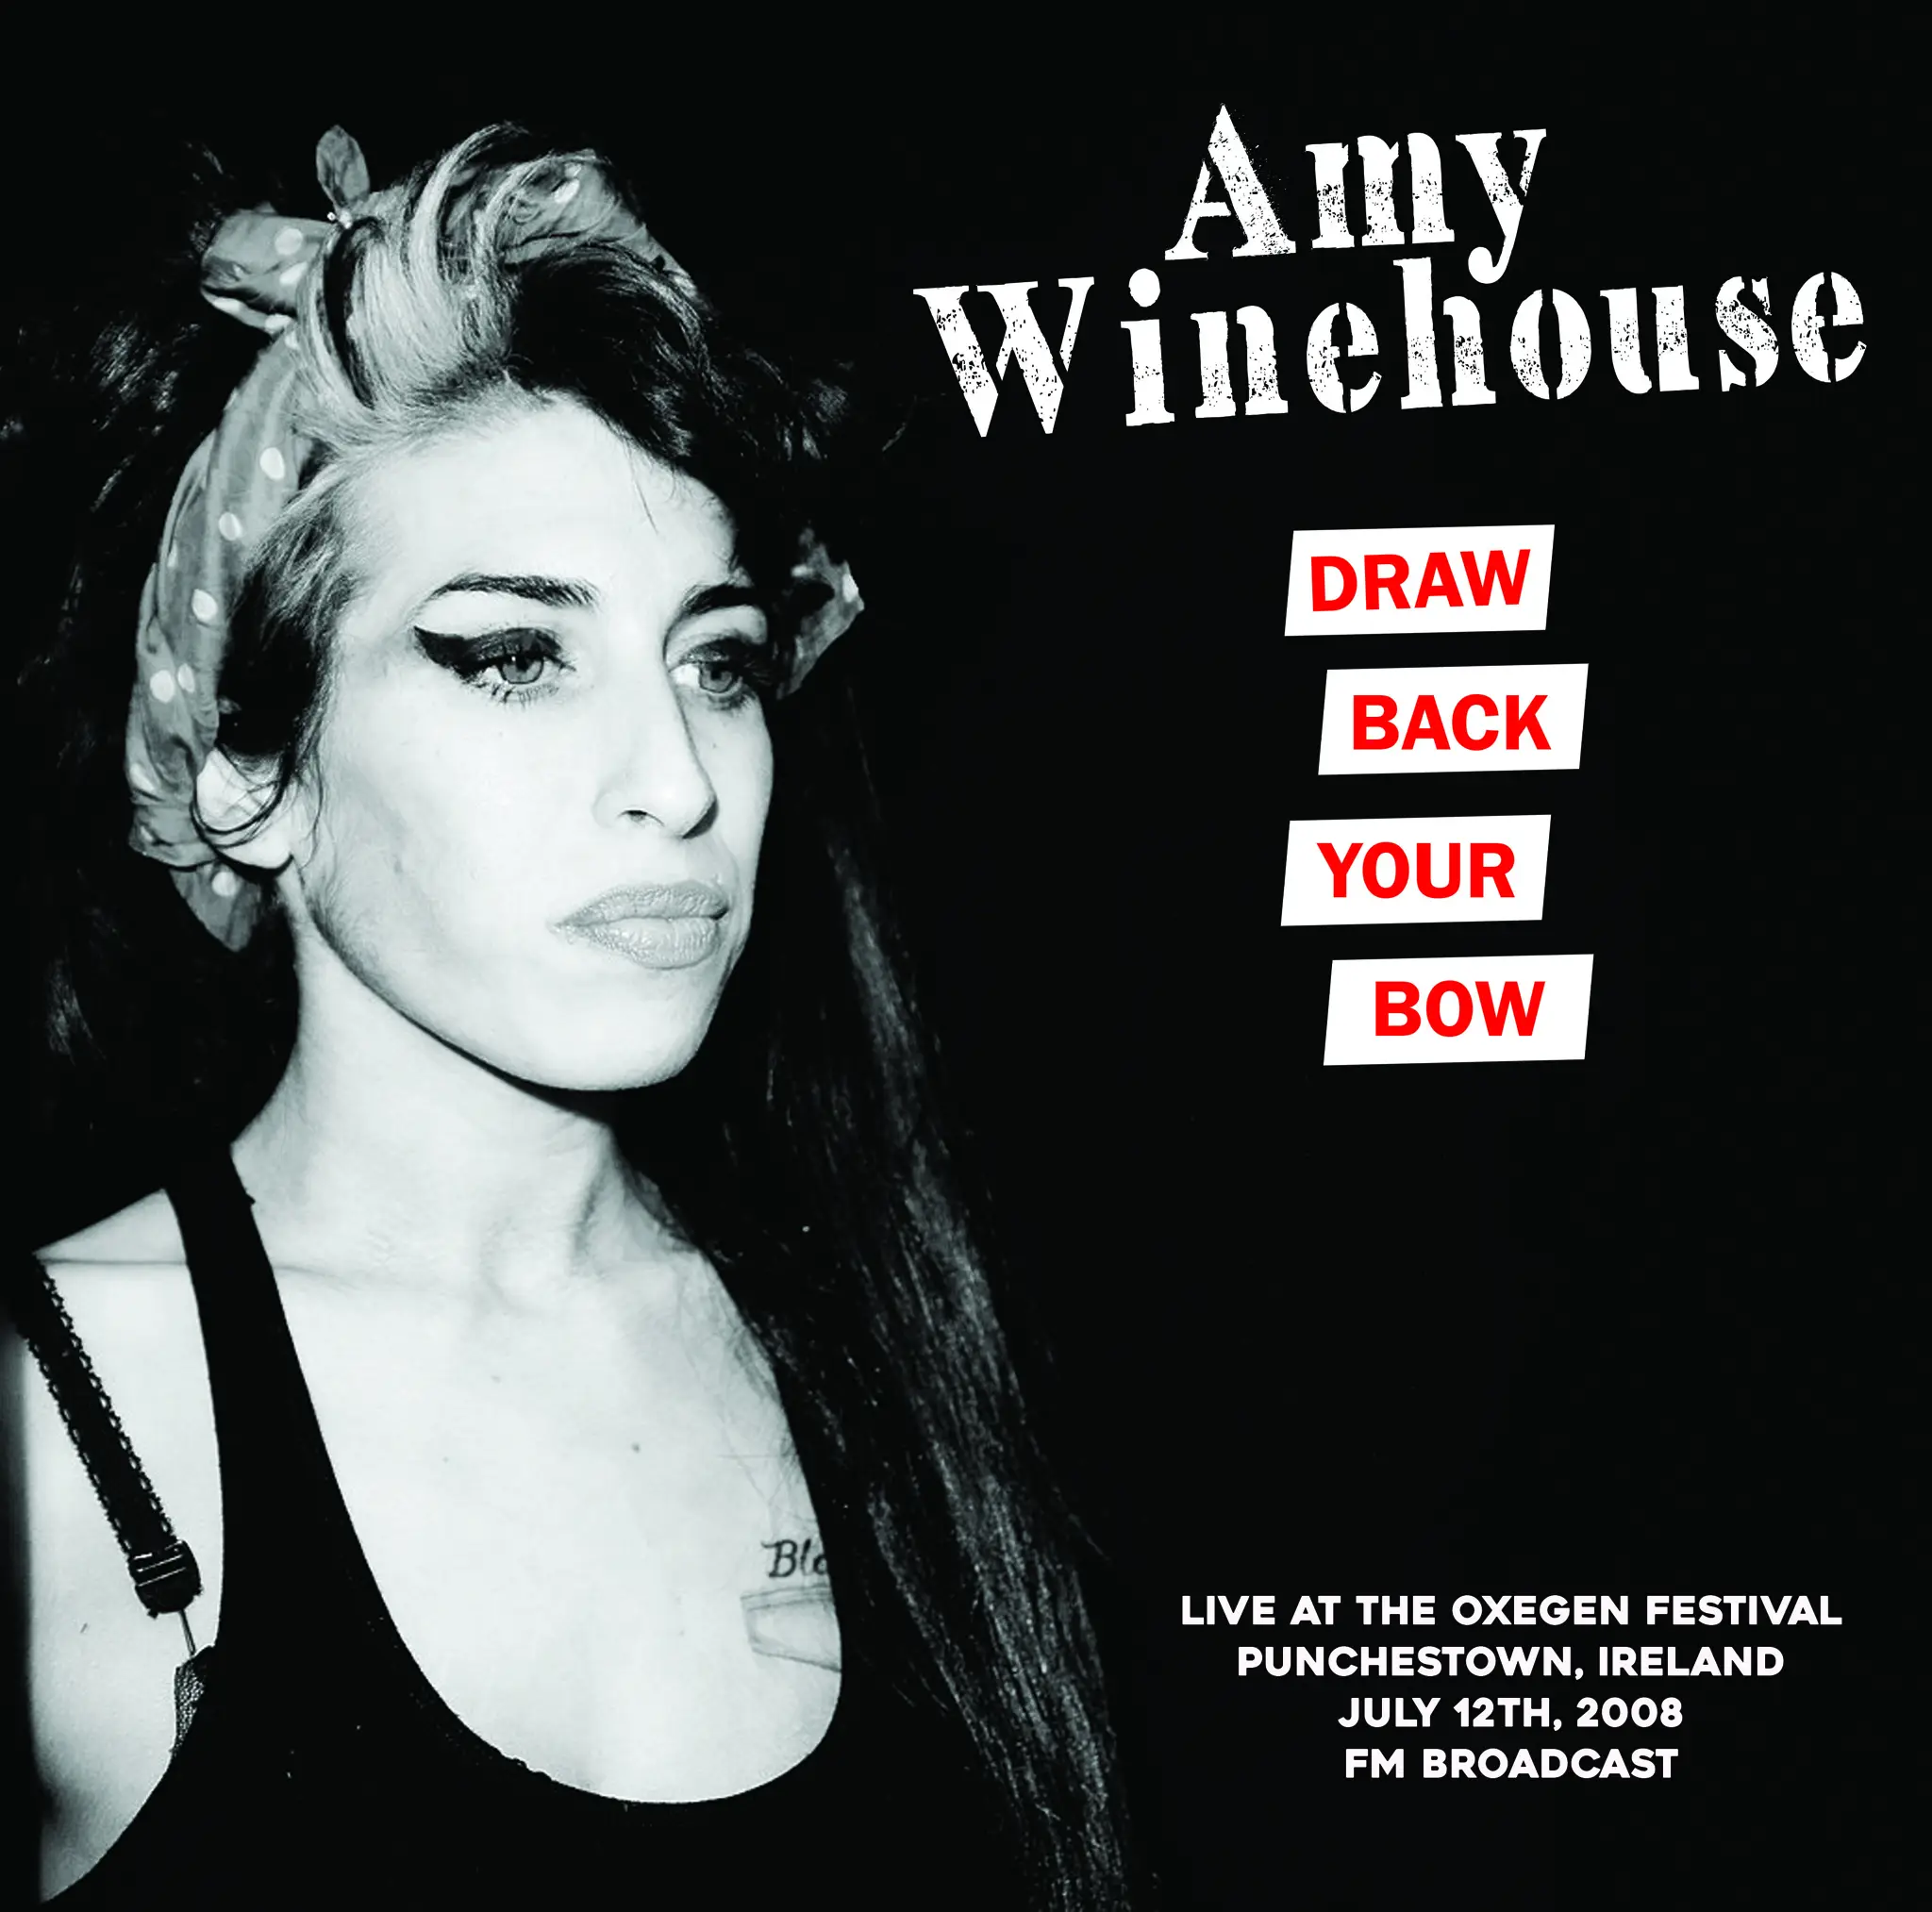 <strong>Amy Winehouse - Draw Back Your Bone: Live At Oxegen Festival, Punchestown, Ireland, 12th July, 2008 - FM Broadcast</strong> (Vinyl LP - black)